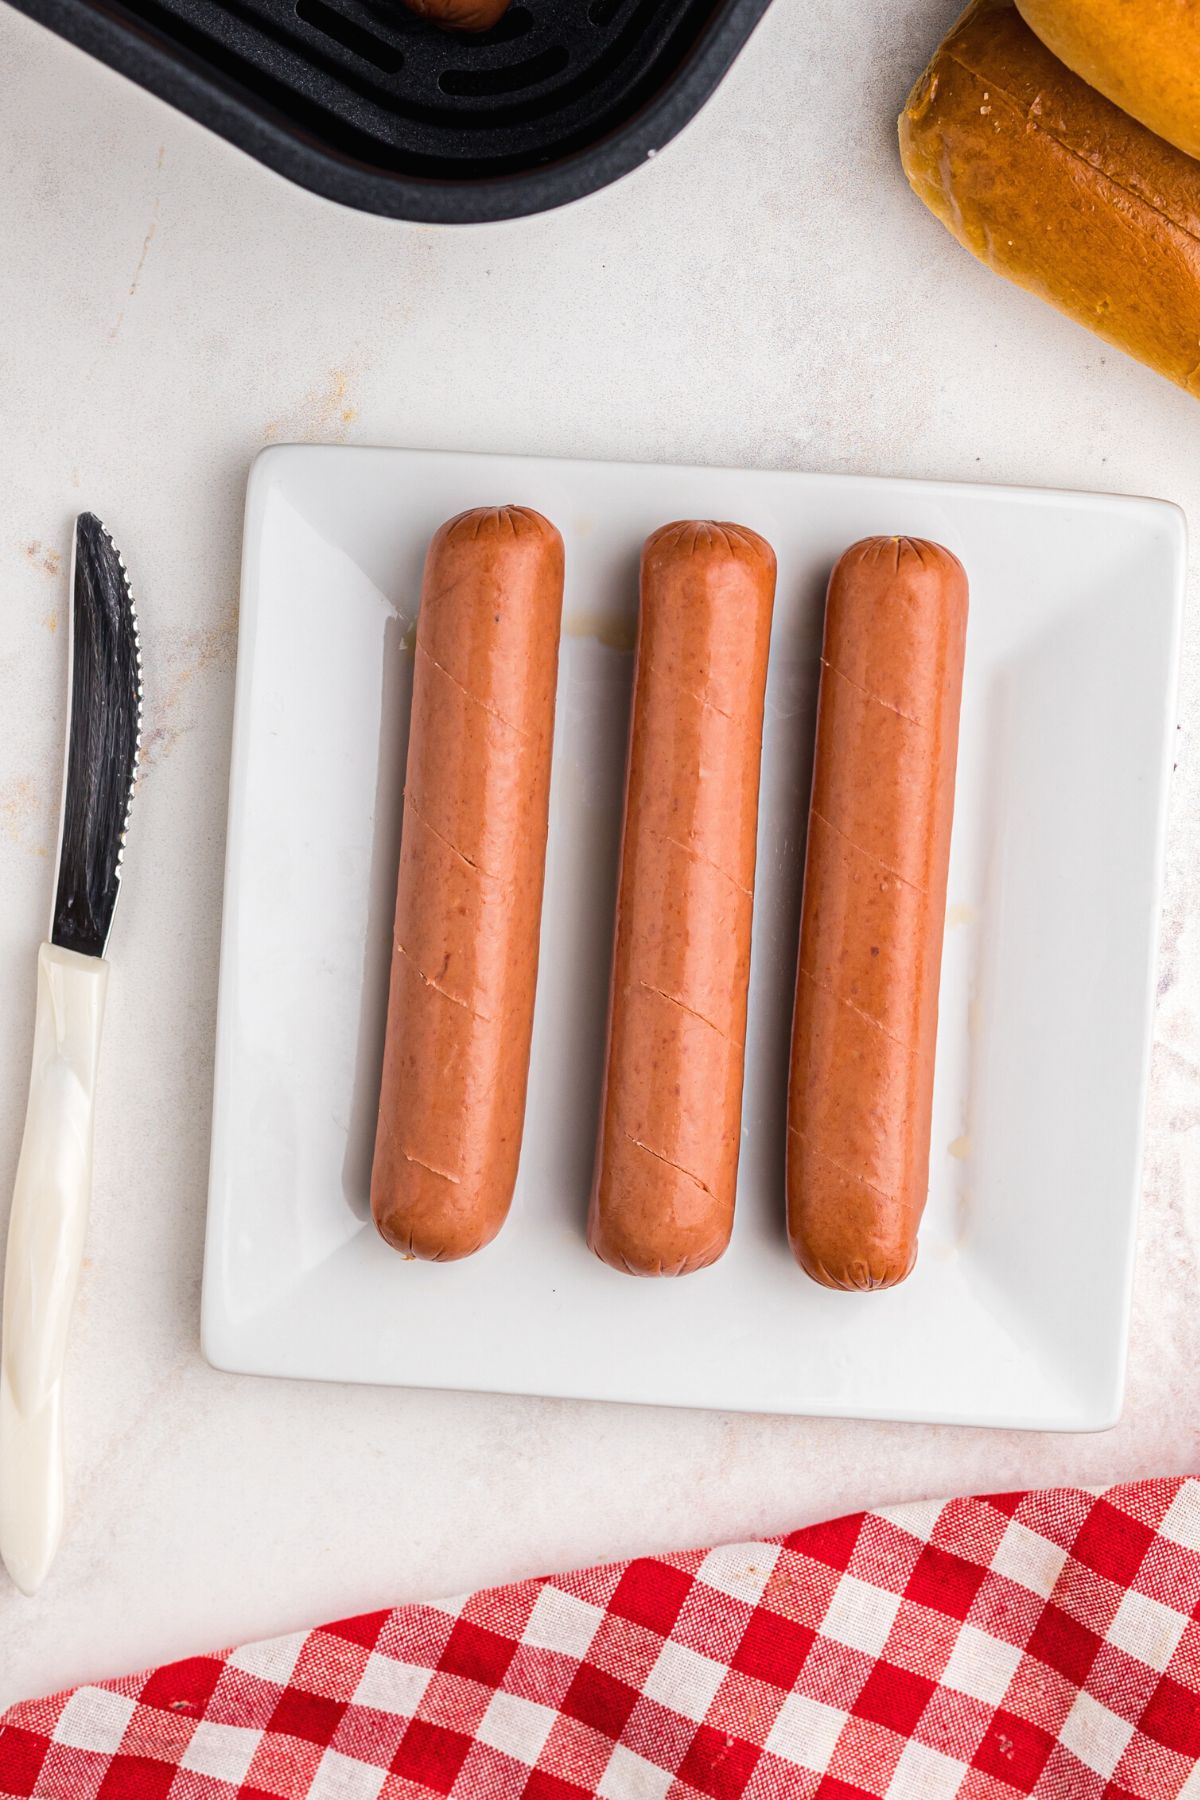 Uncooked hot dogs on a white plate with slits cut into them with a knife